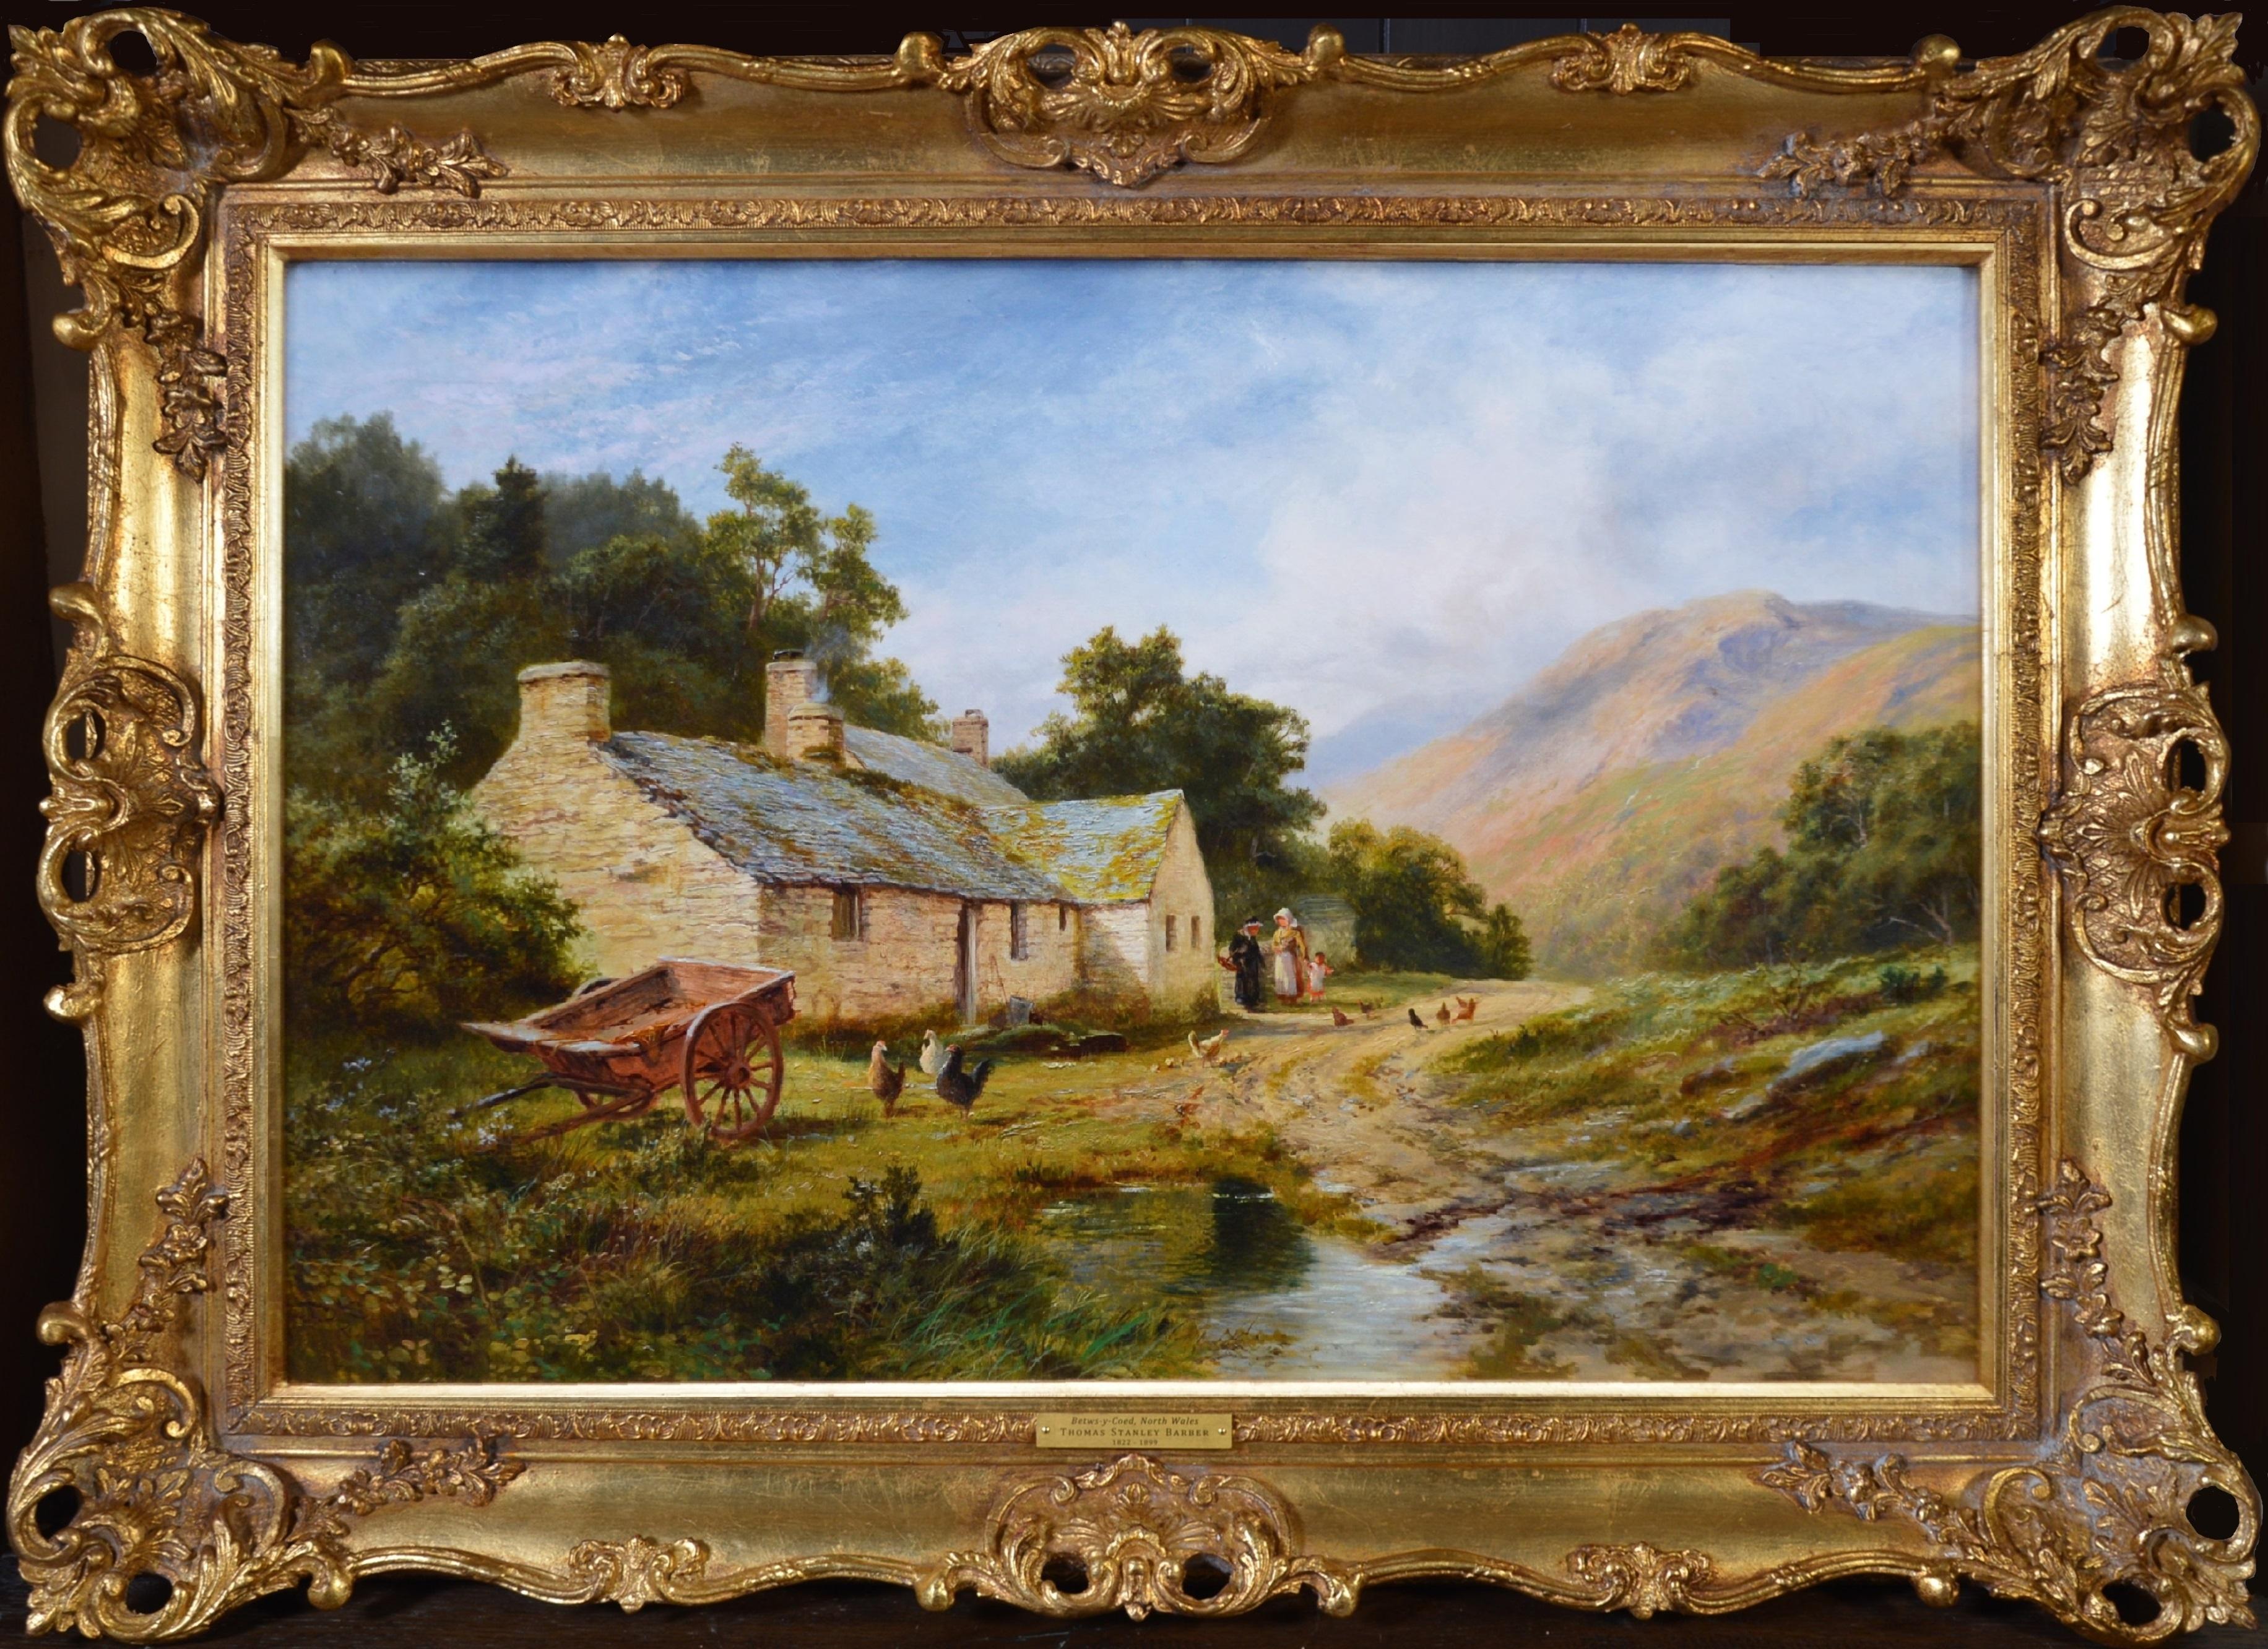 Robert Gallon Landscape Painting - In the Lledr Valley - Large 19th Century Summer Landscape Oil Painting Snowdonia